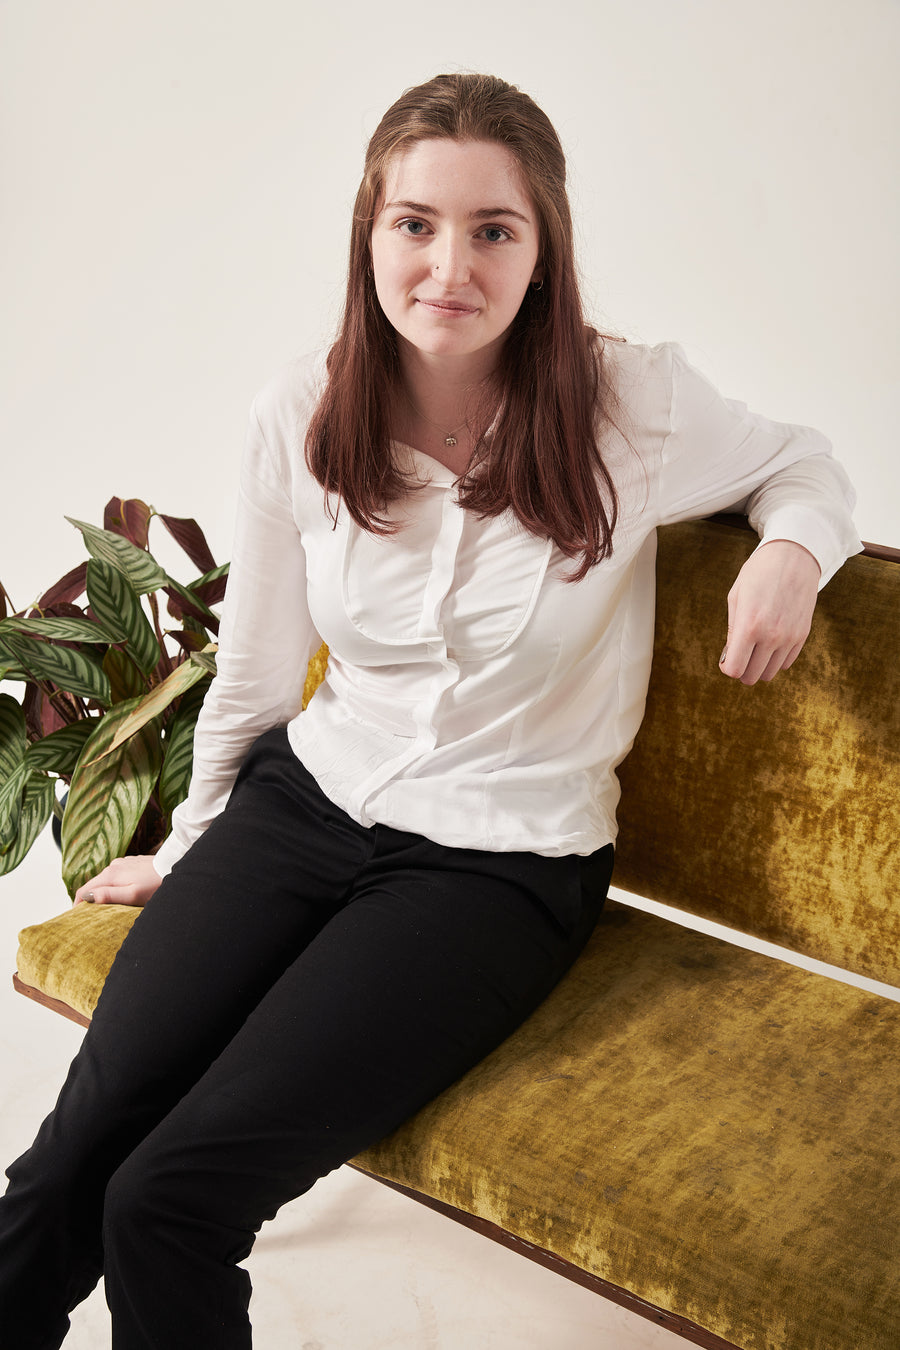 A woman with dark brown hair in a half up half style smiles in to the camera. She is wearing a white shirt with a bib seam detail and black trousers. She is siting on a crushed velvet sofa that is moss coloured. There is a plant on the floor just behind her. The background is white.